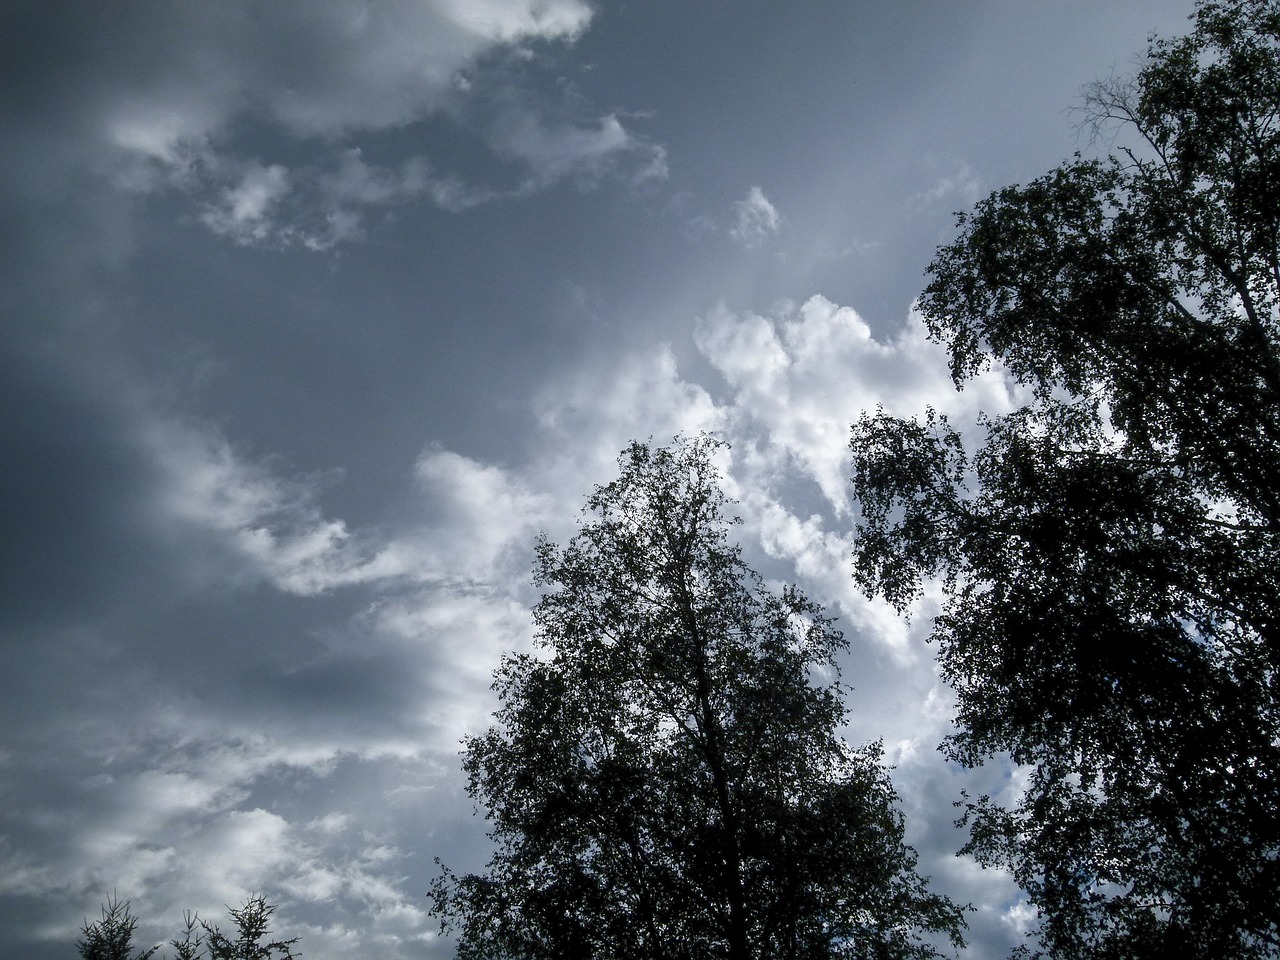 An image of dark clouds behind some trees.